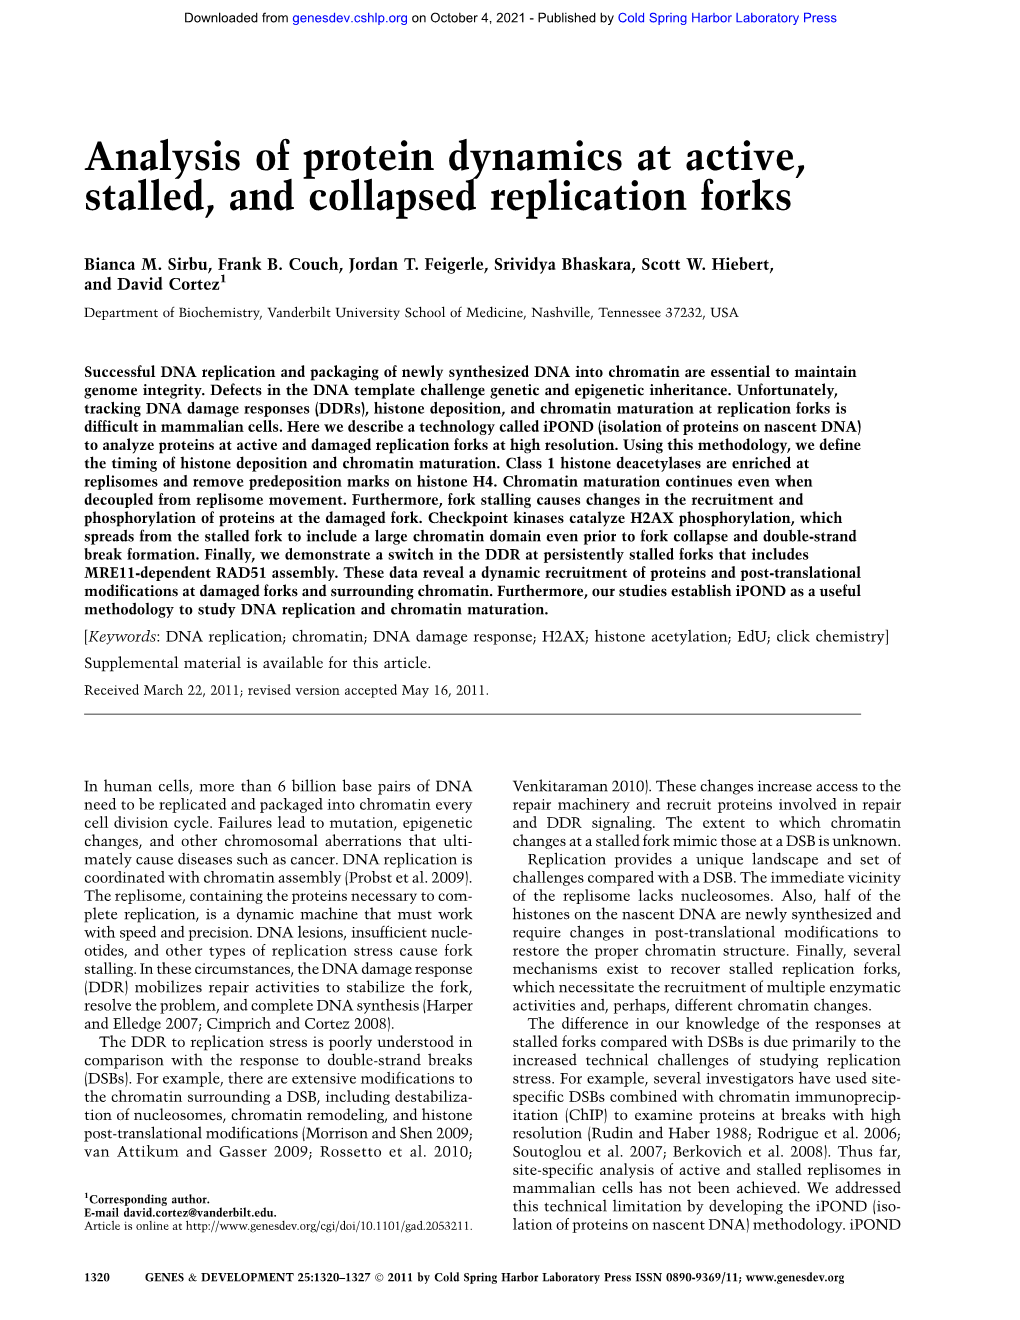 Analysis of Protein Dynamics at Active, Stalled, and Collapsed Replication Forks